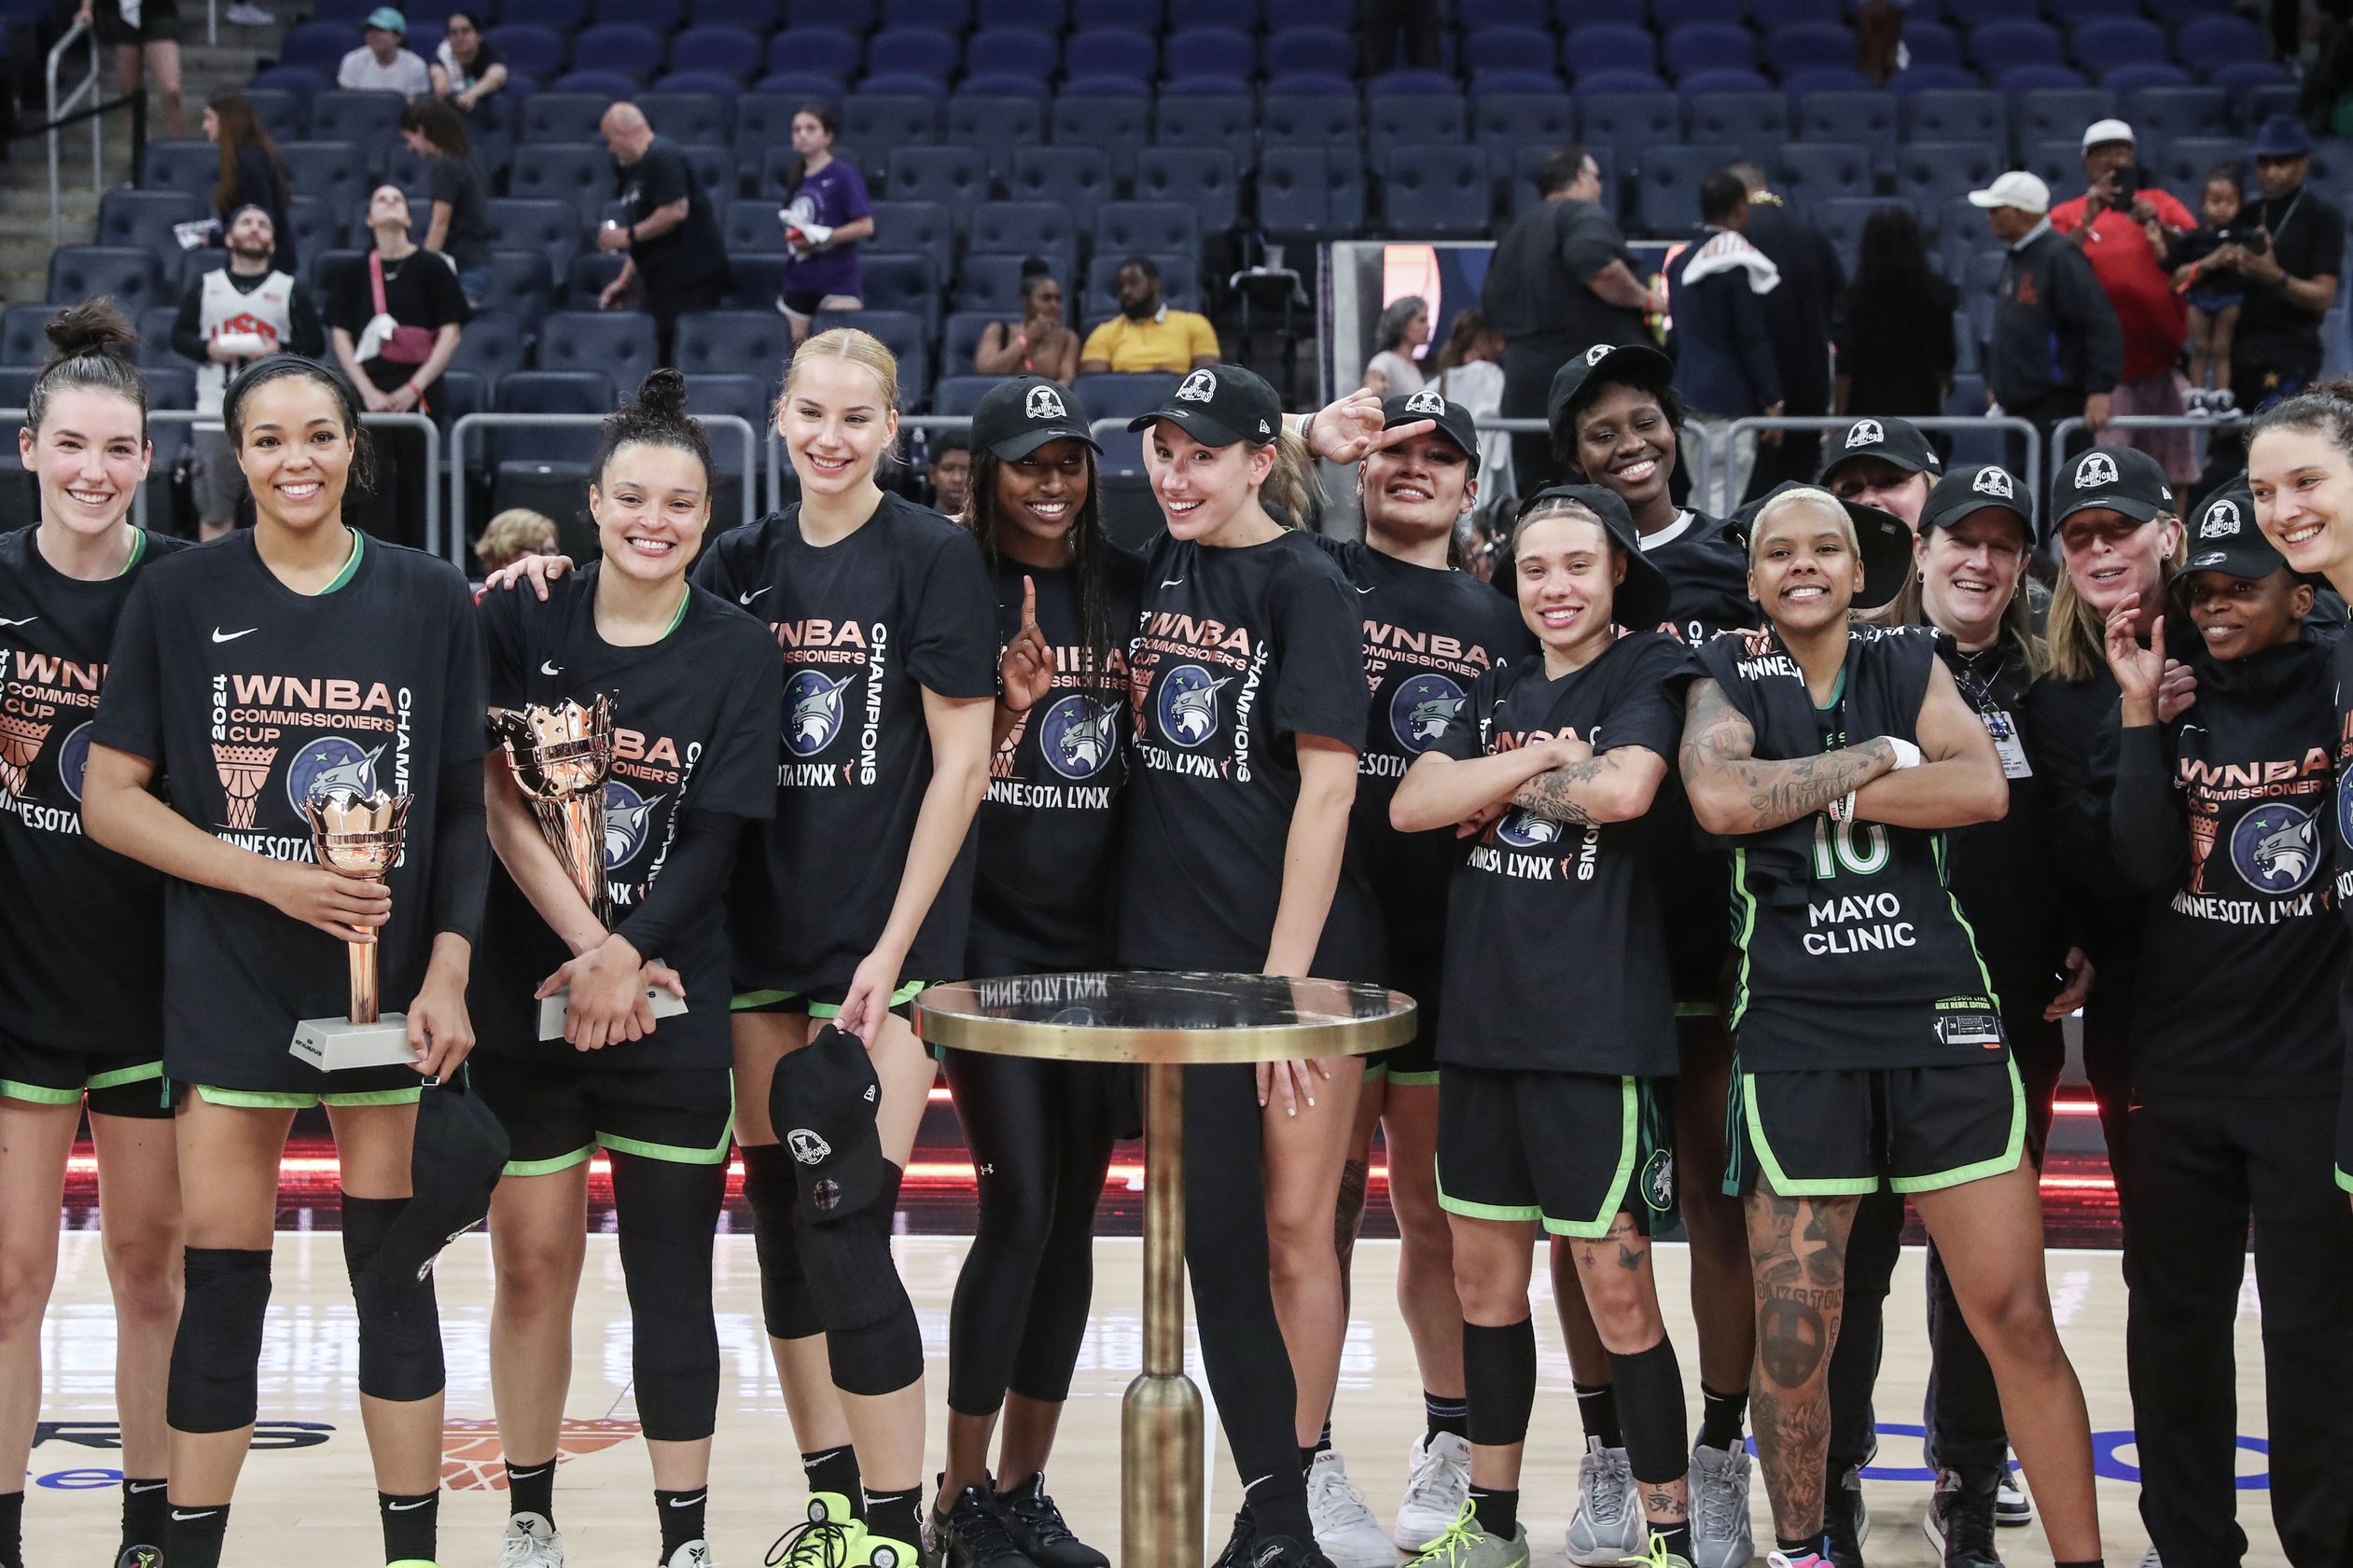 The Minnesota Lynx celebrate after defeating the New York Liberty 94-89 to win the WNBA Commissioner’s Cup Championship at UBS Arena.